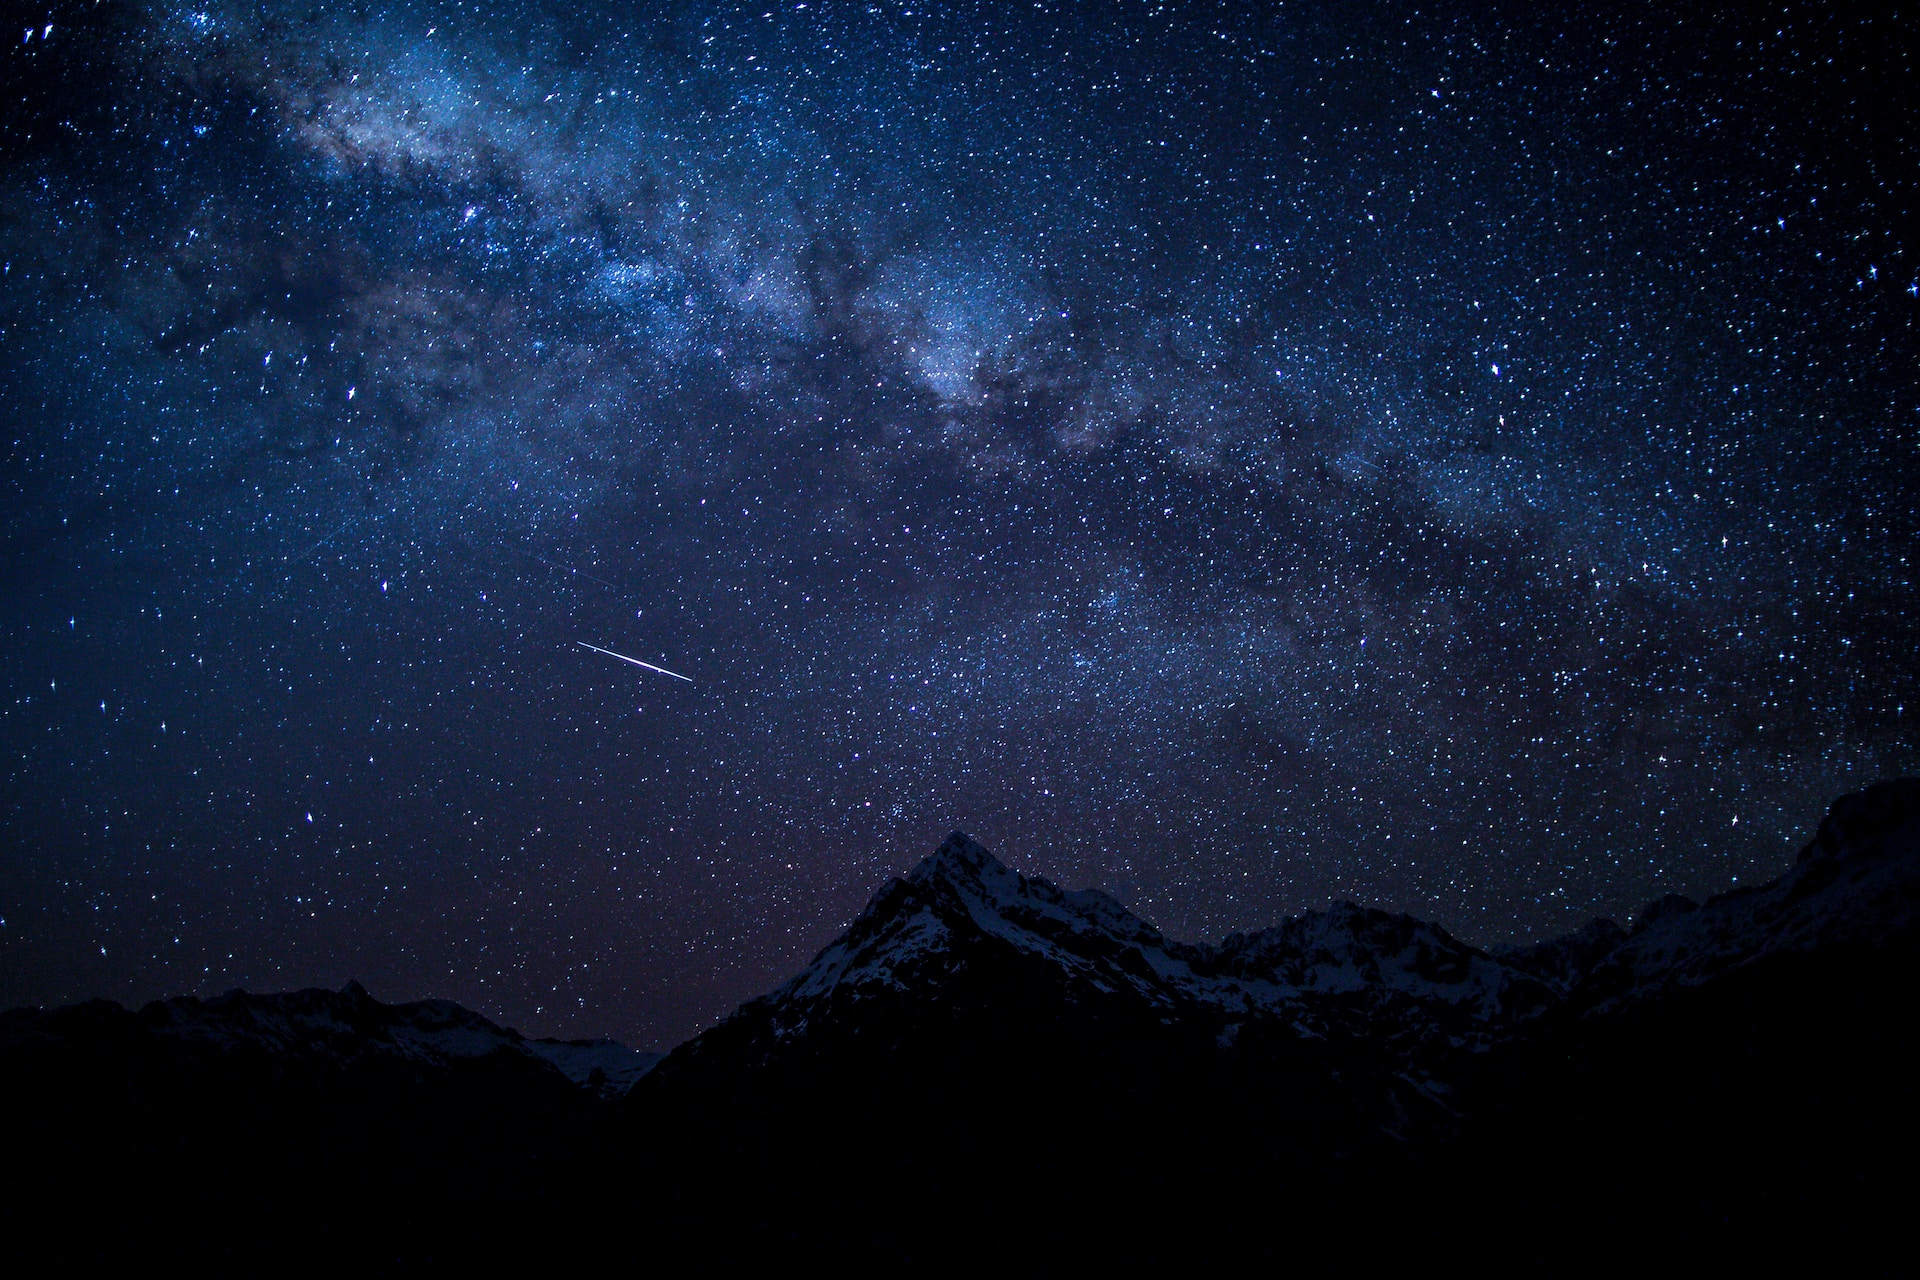 Nightscape of the silhouette of a mountain in New Zealand with the stars, milky way and a comet in the background.